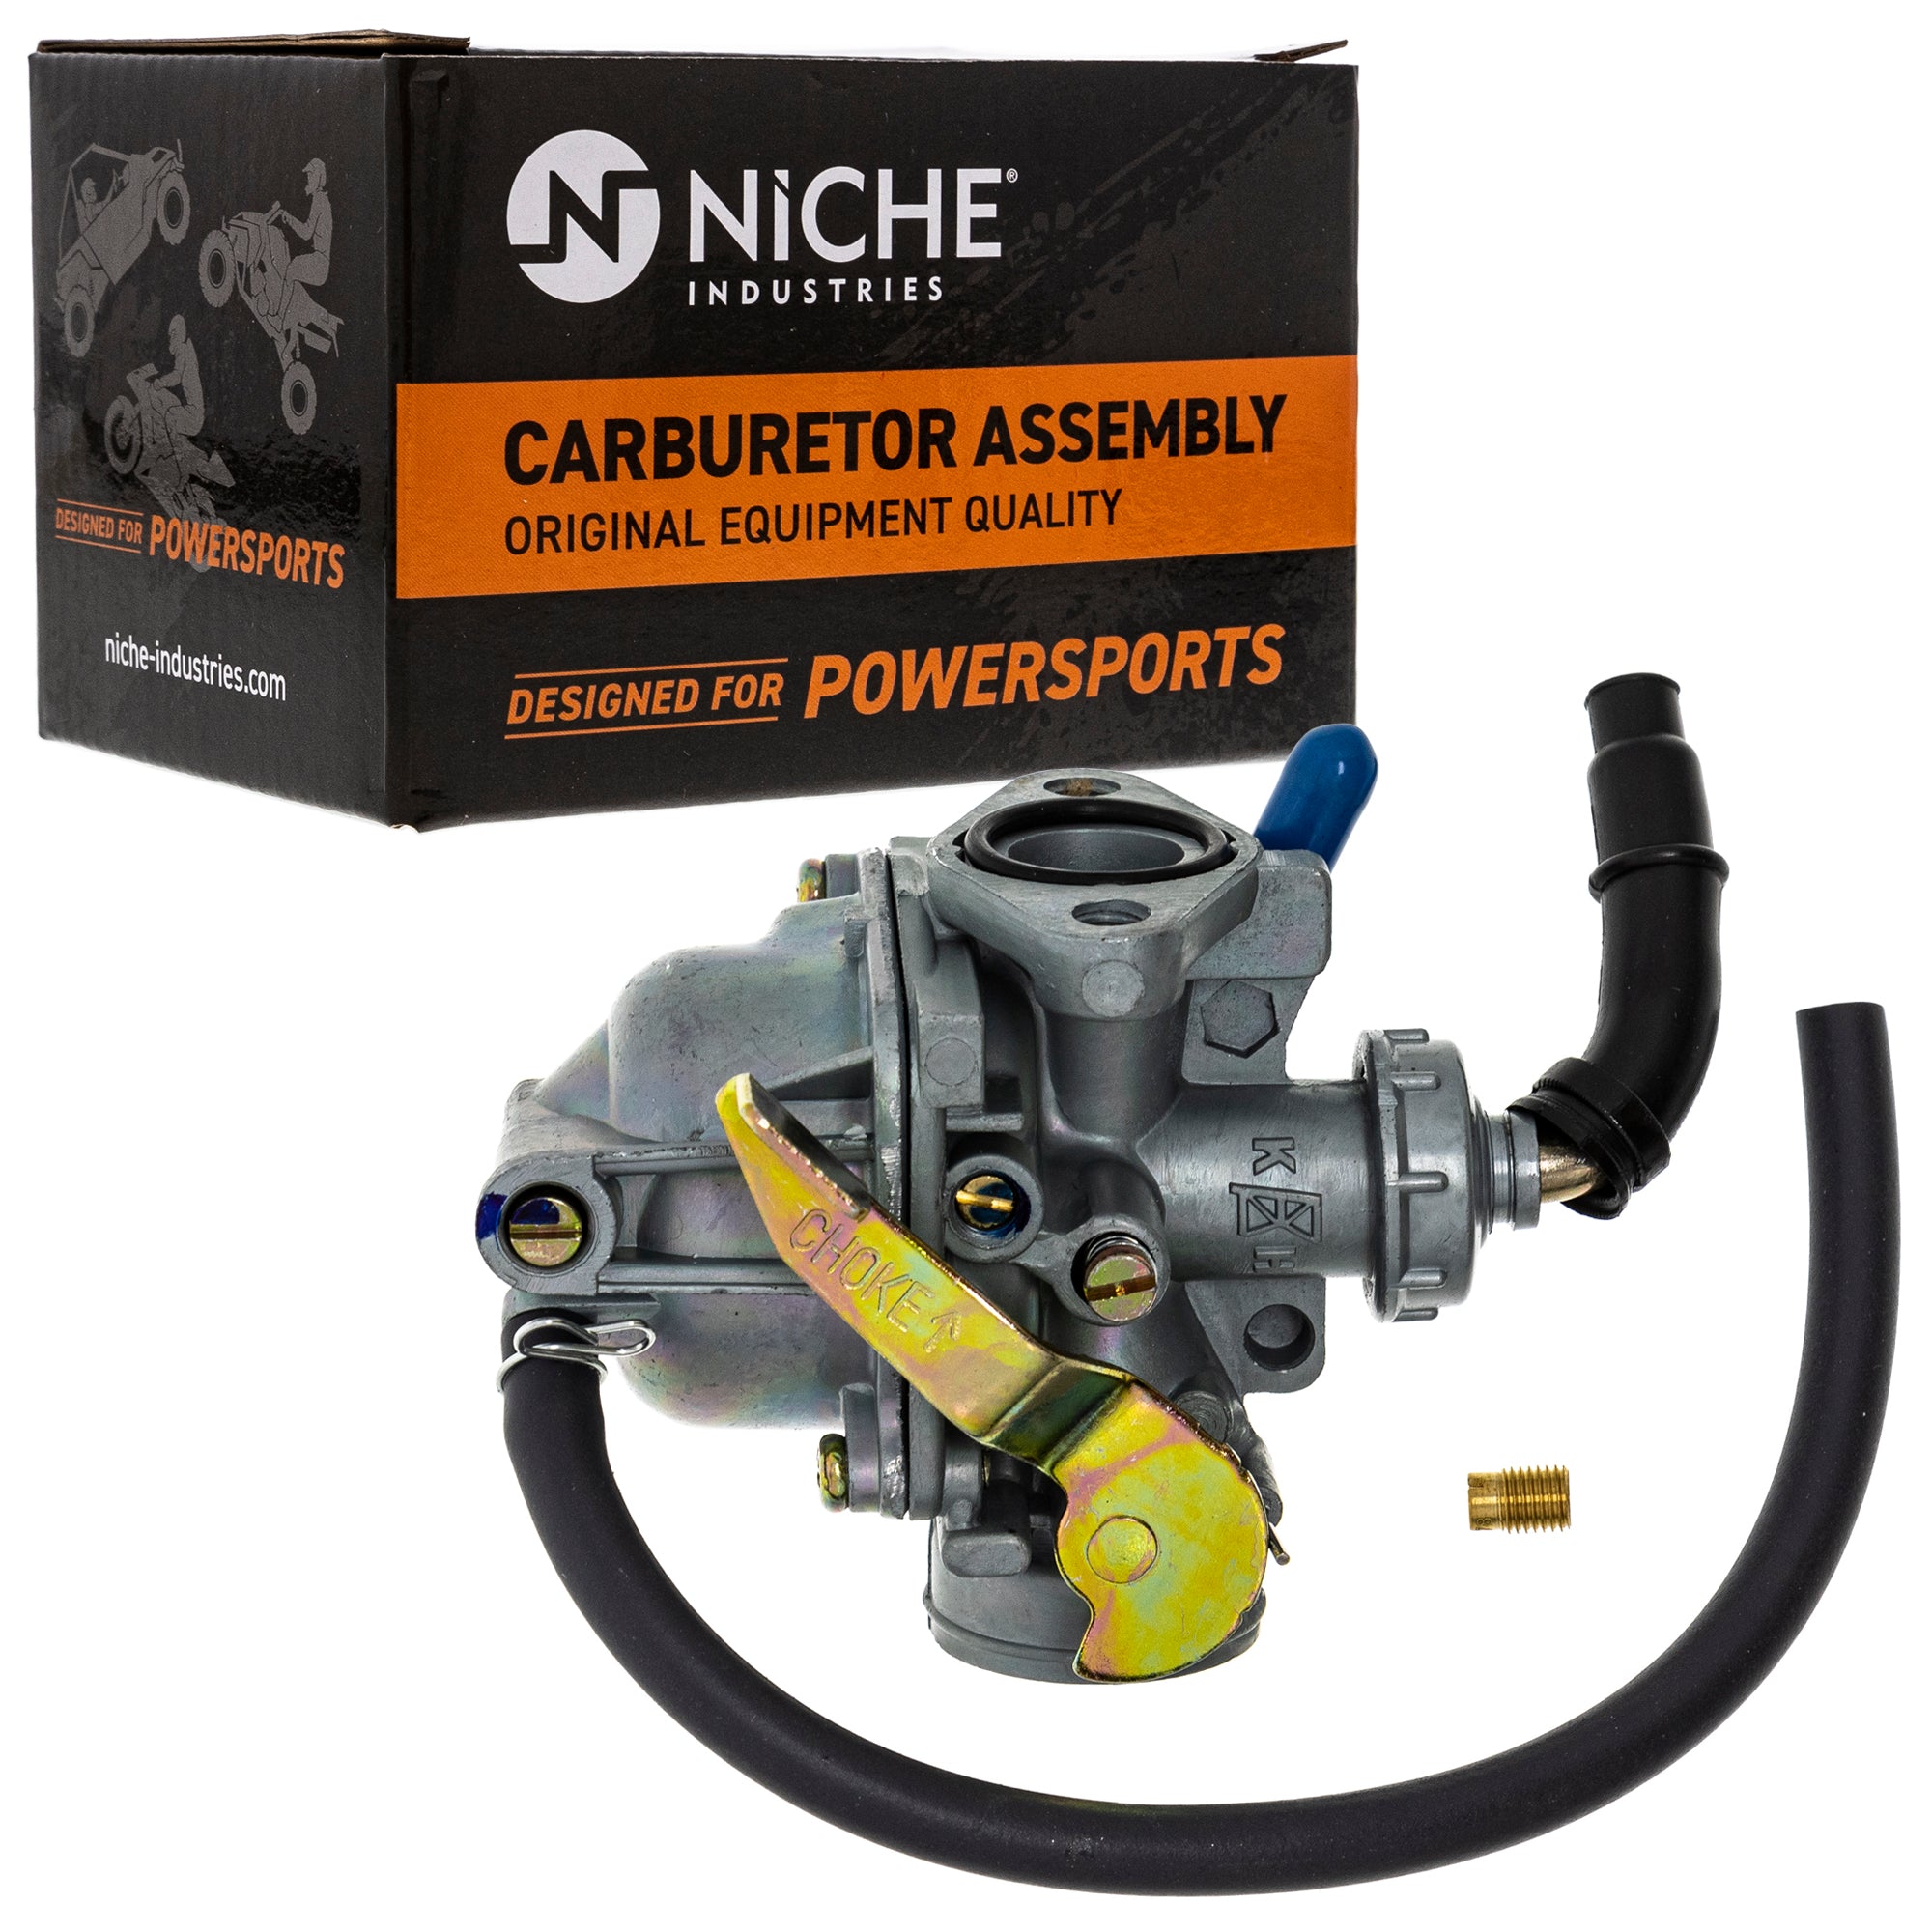 NICHE 519-KCR2247B Carburetor Assembly for zOTHER Express